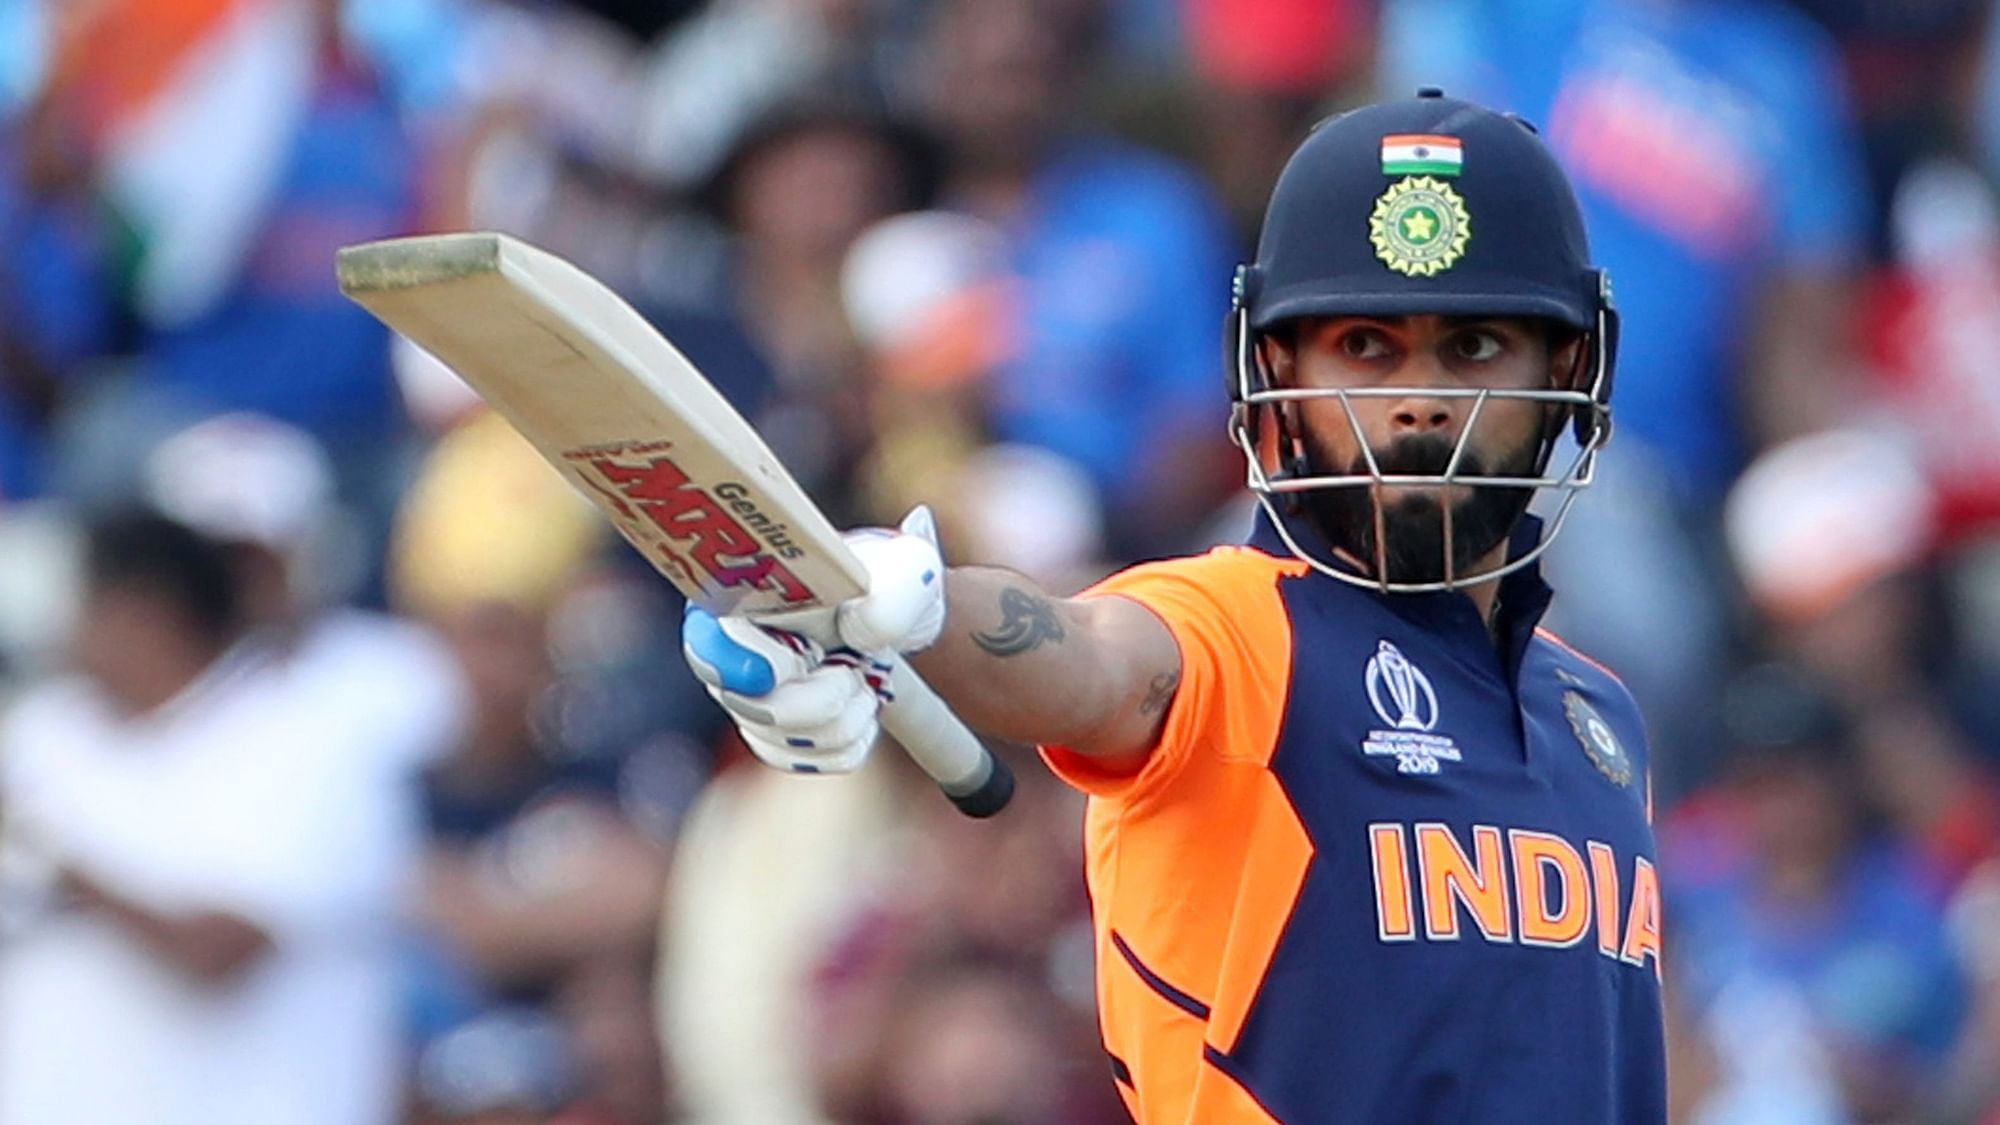 India’s captain Virat Kohli raises his bat to celebrate scoring fifty runs during the Cricket World Cup match between England and India